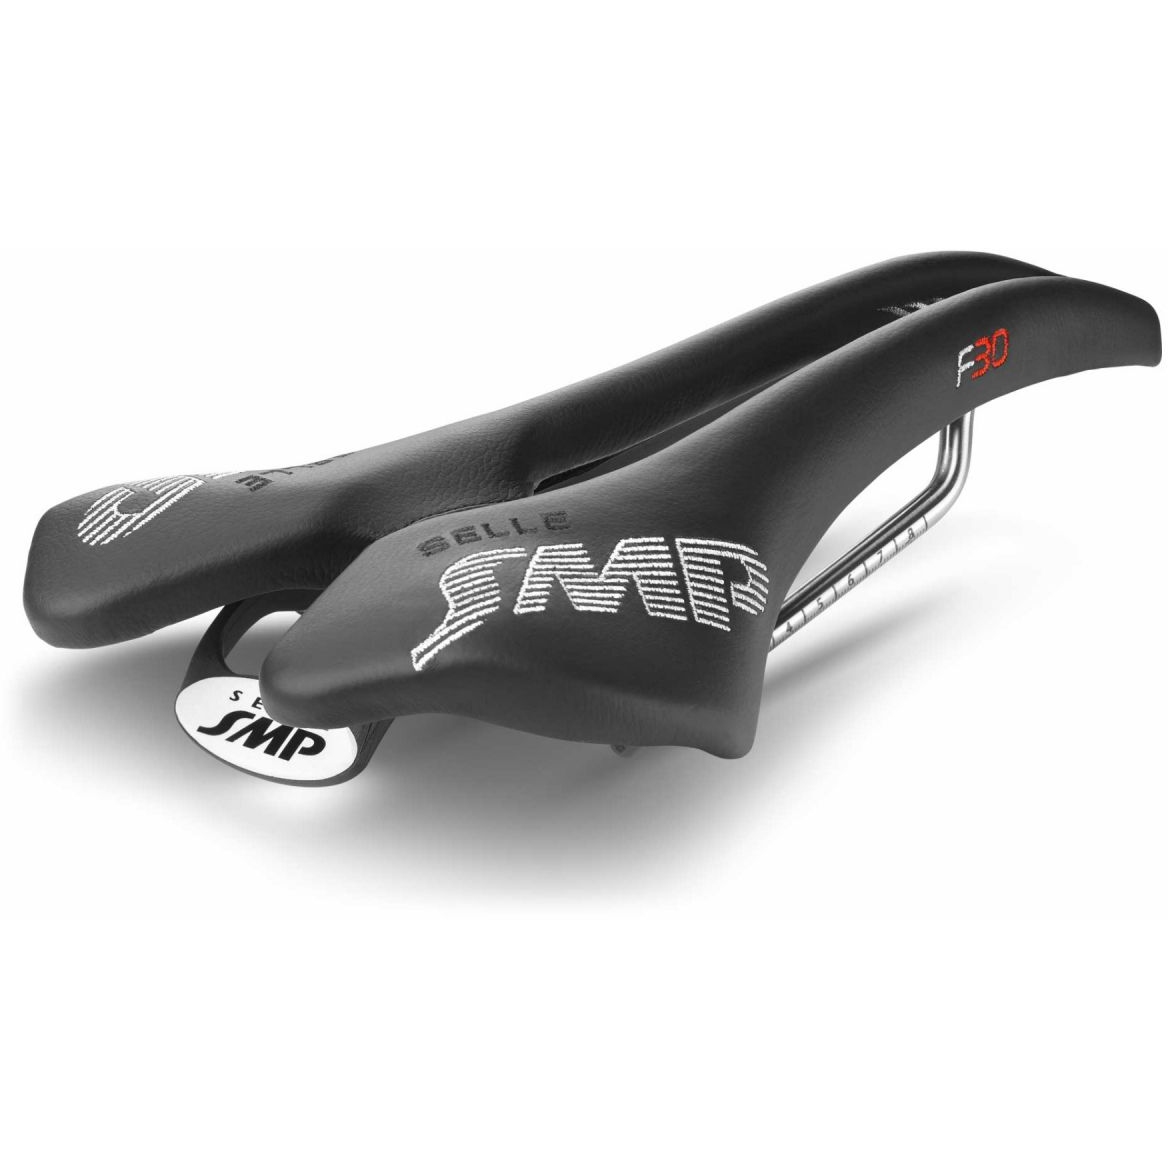 Picture of Selle SMP F30 Saddle - black